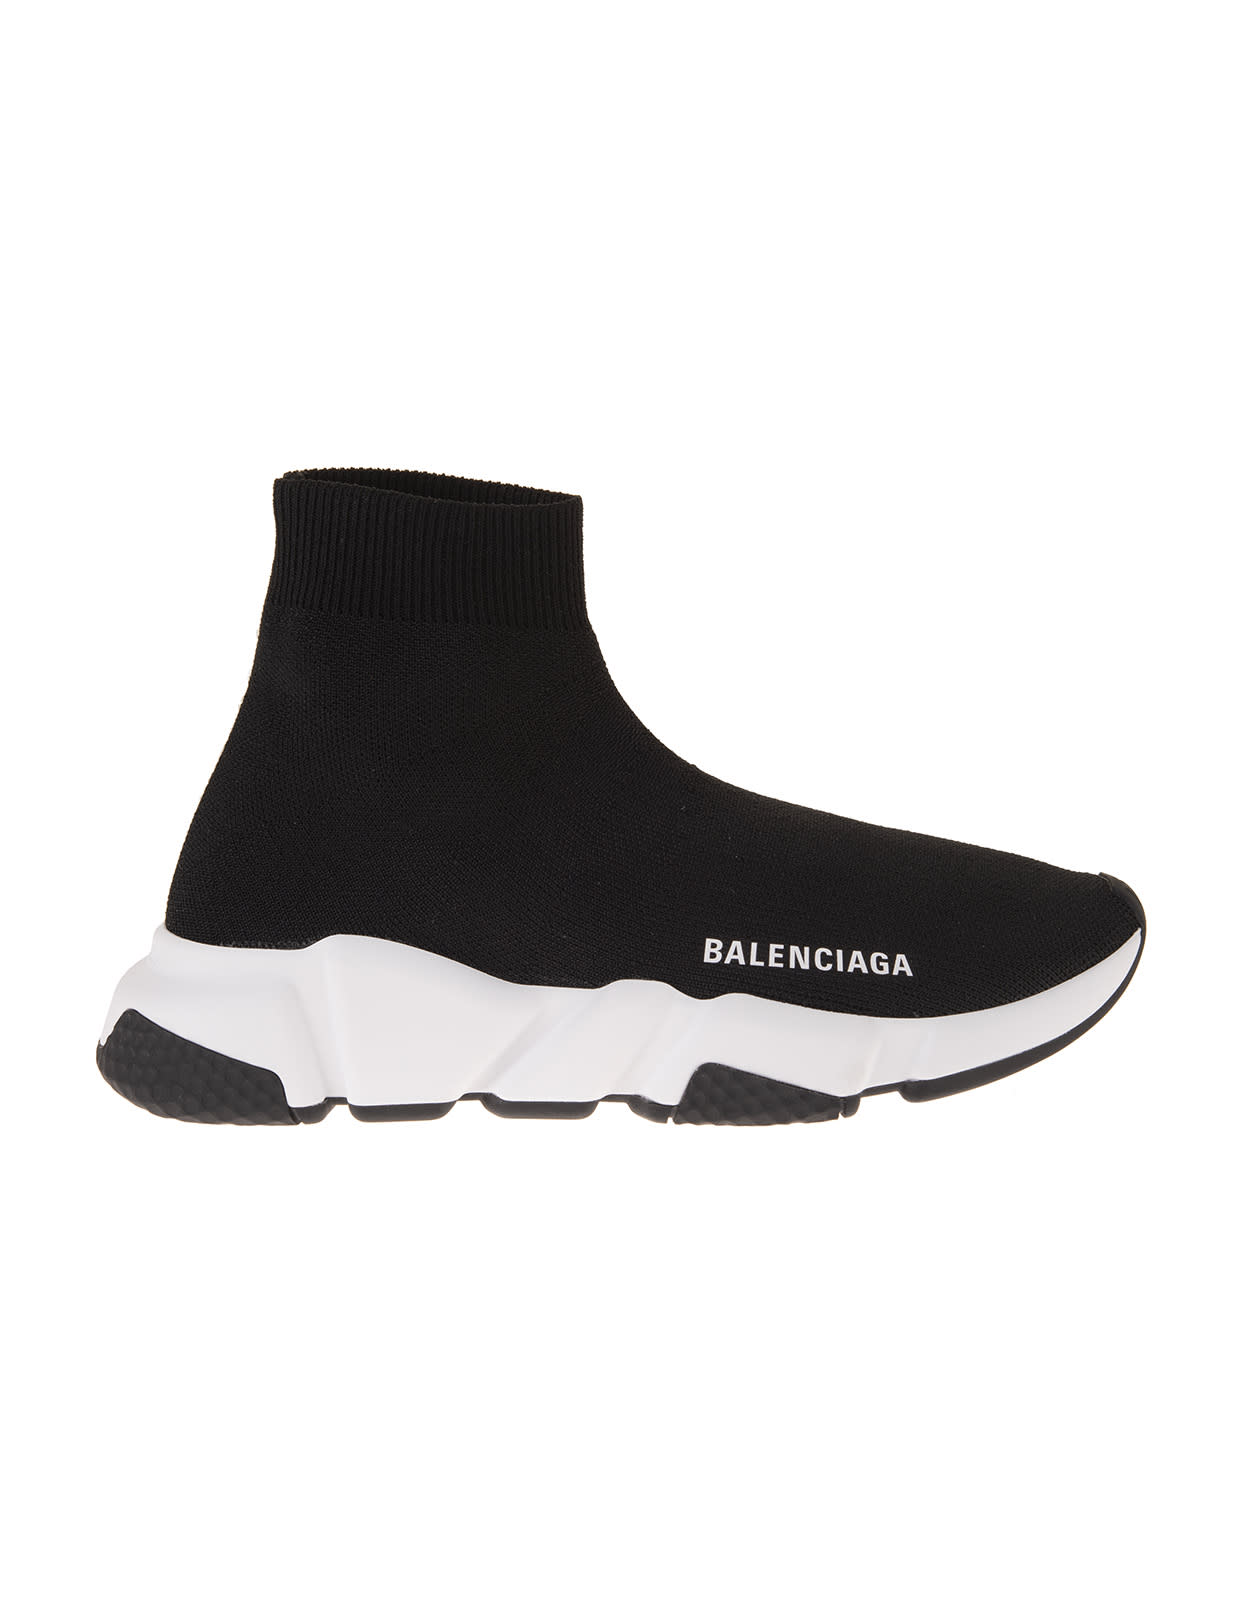 Buy Balenciaga Woman Black And White Speed Recycled Sneakers online, shop Balenciaga shoes with free shipping